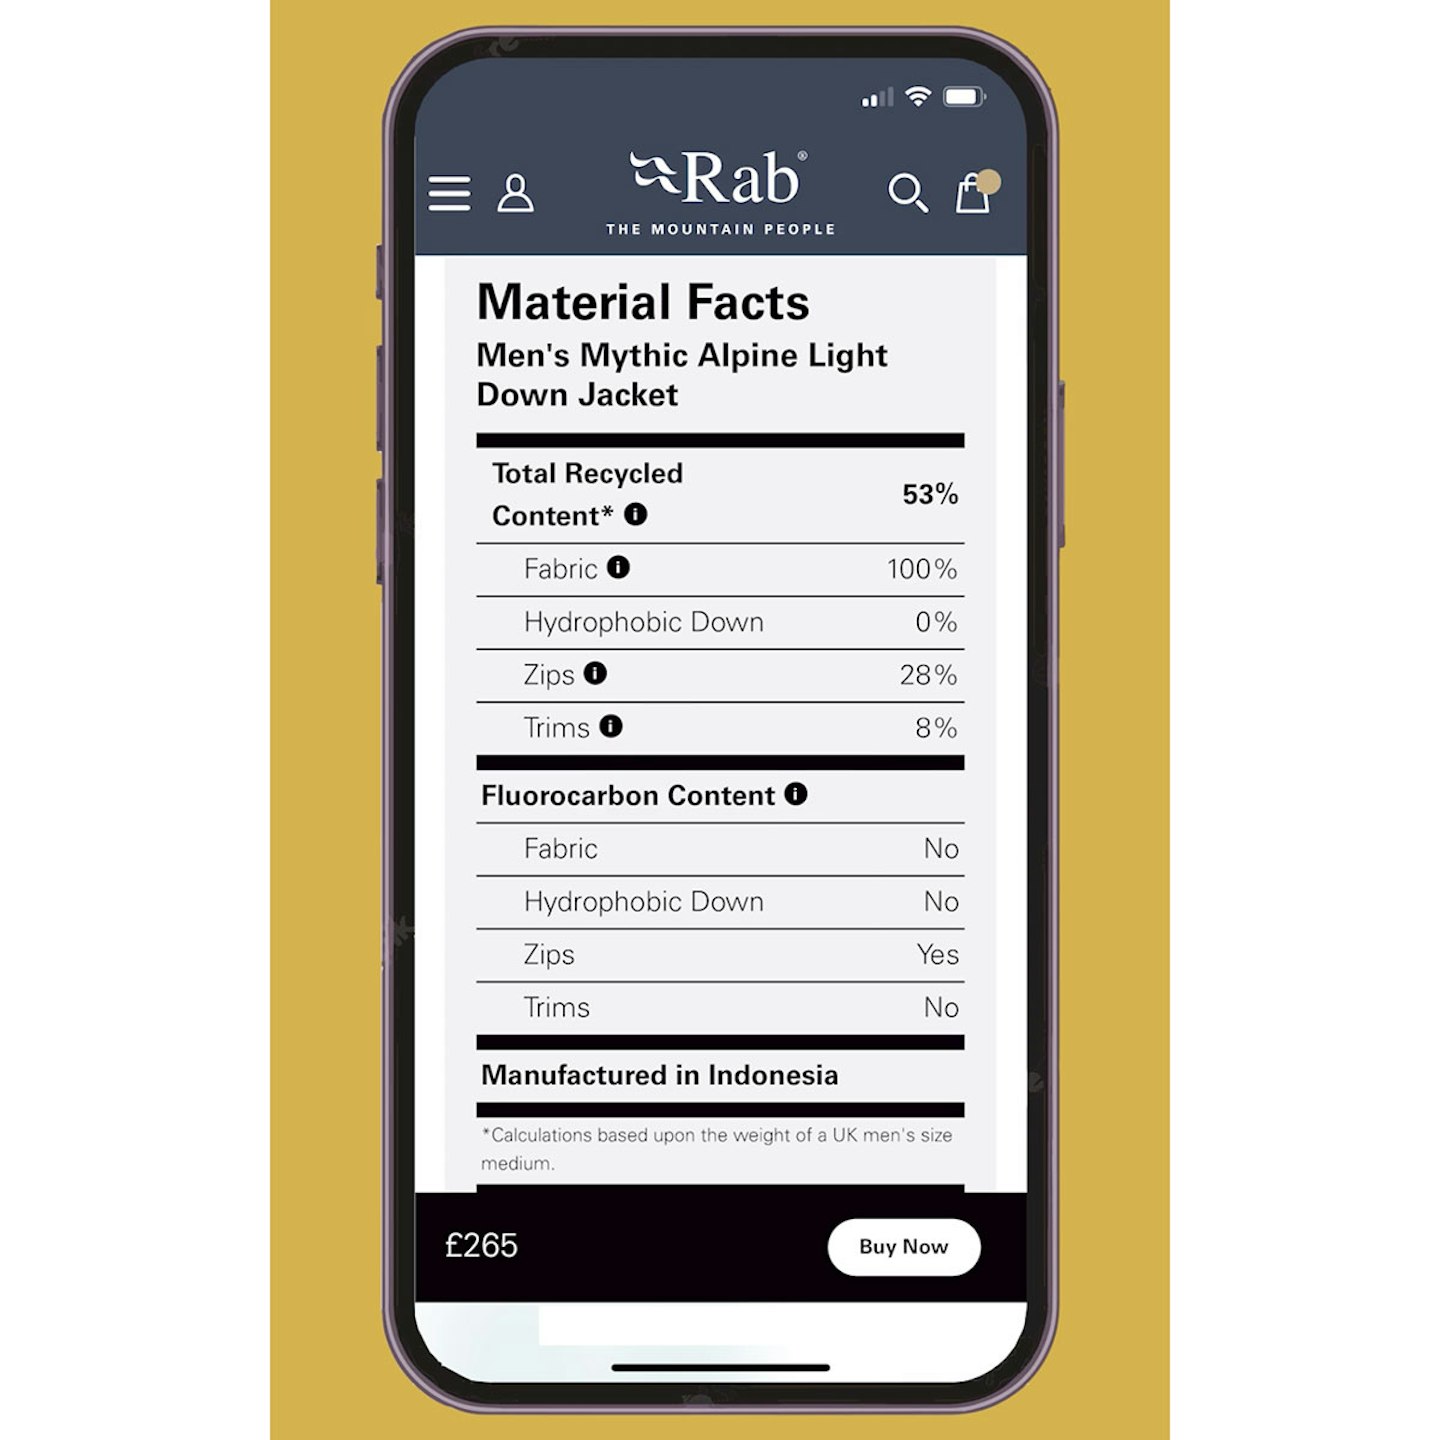 A Rab Material Facts table viewed on a smartphone